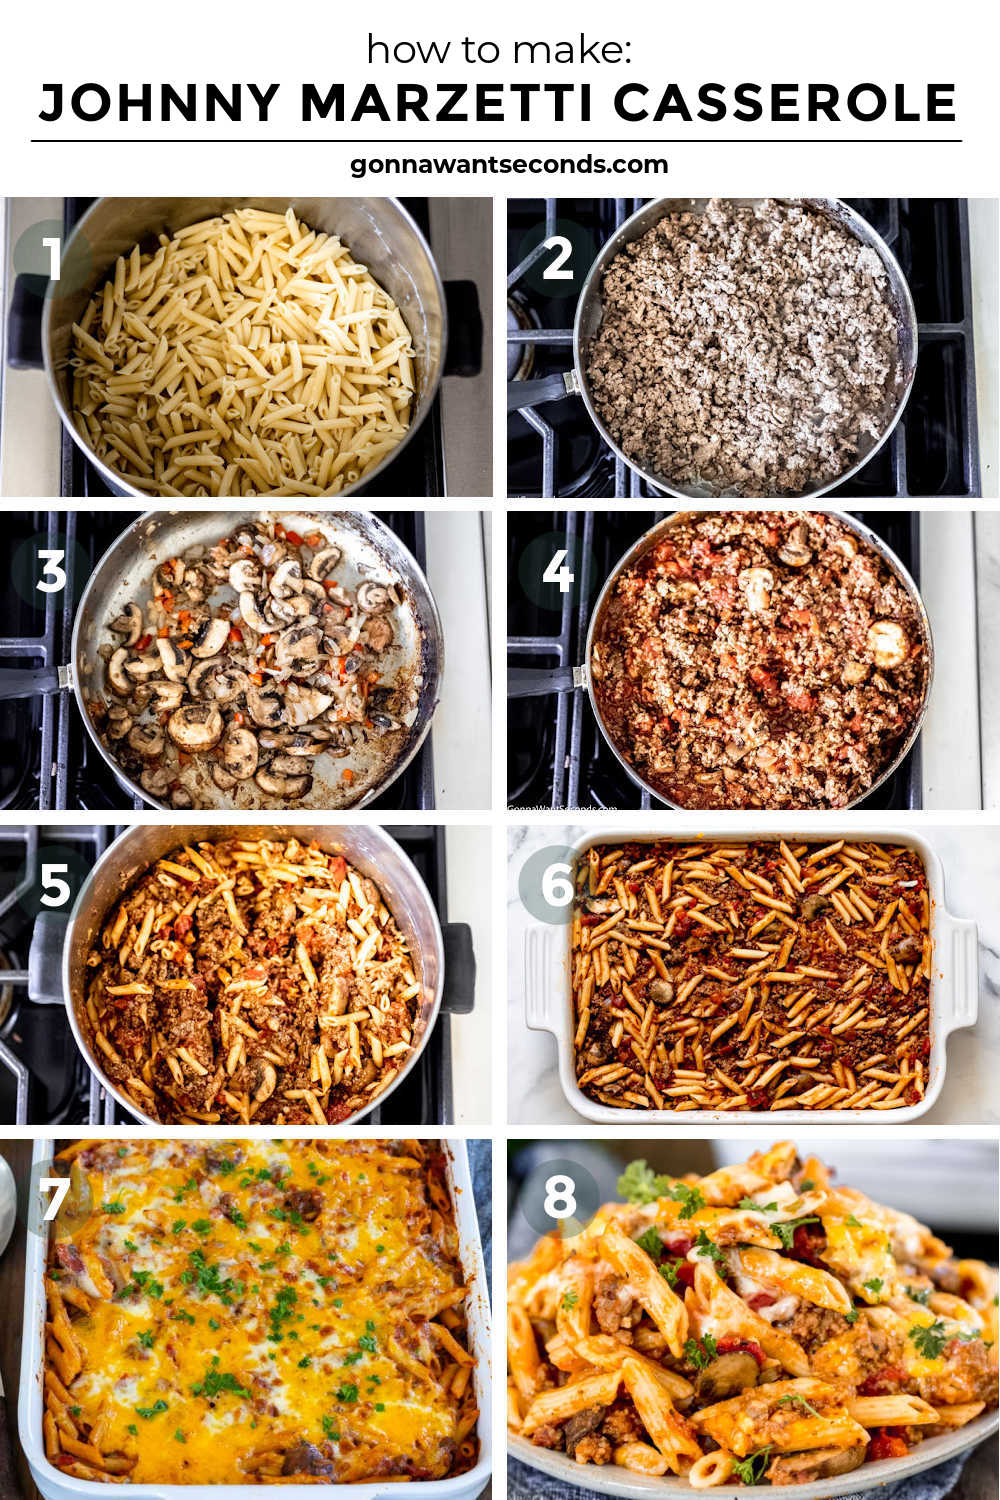 Step by step How to make Johnny Marzetti Casserole